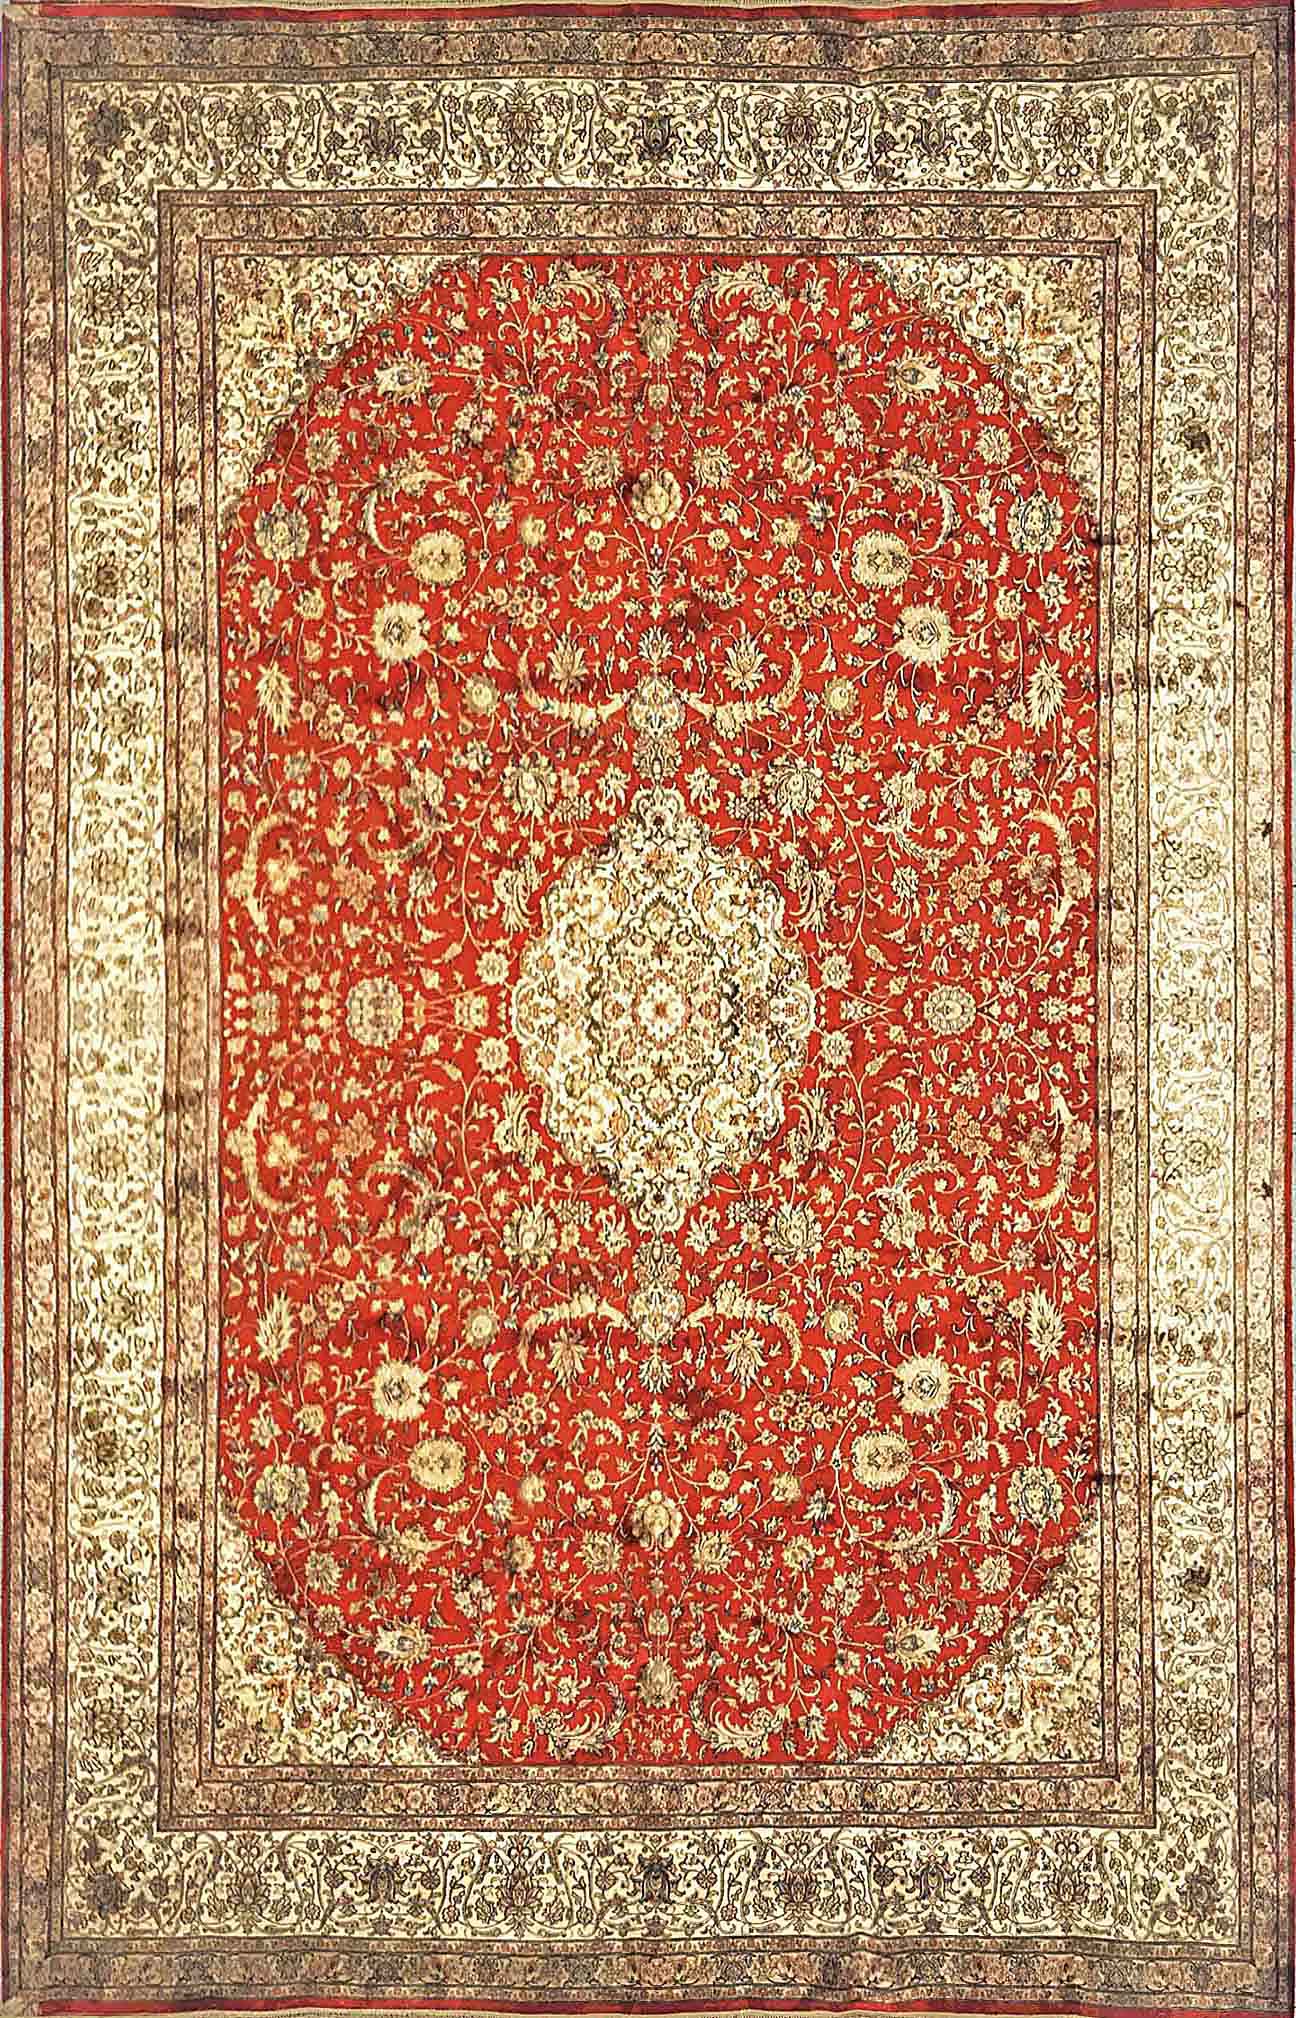 A 9 feet by 12 feet Kashmiri silk on silk carpet/rug. The colours used on the rug are rust,red,beige and golden brown.